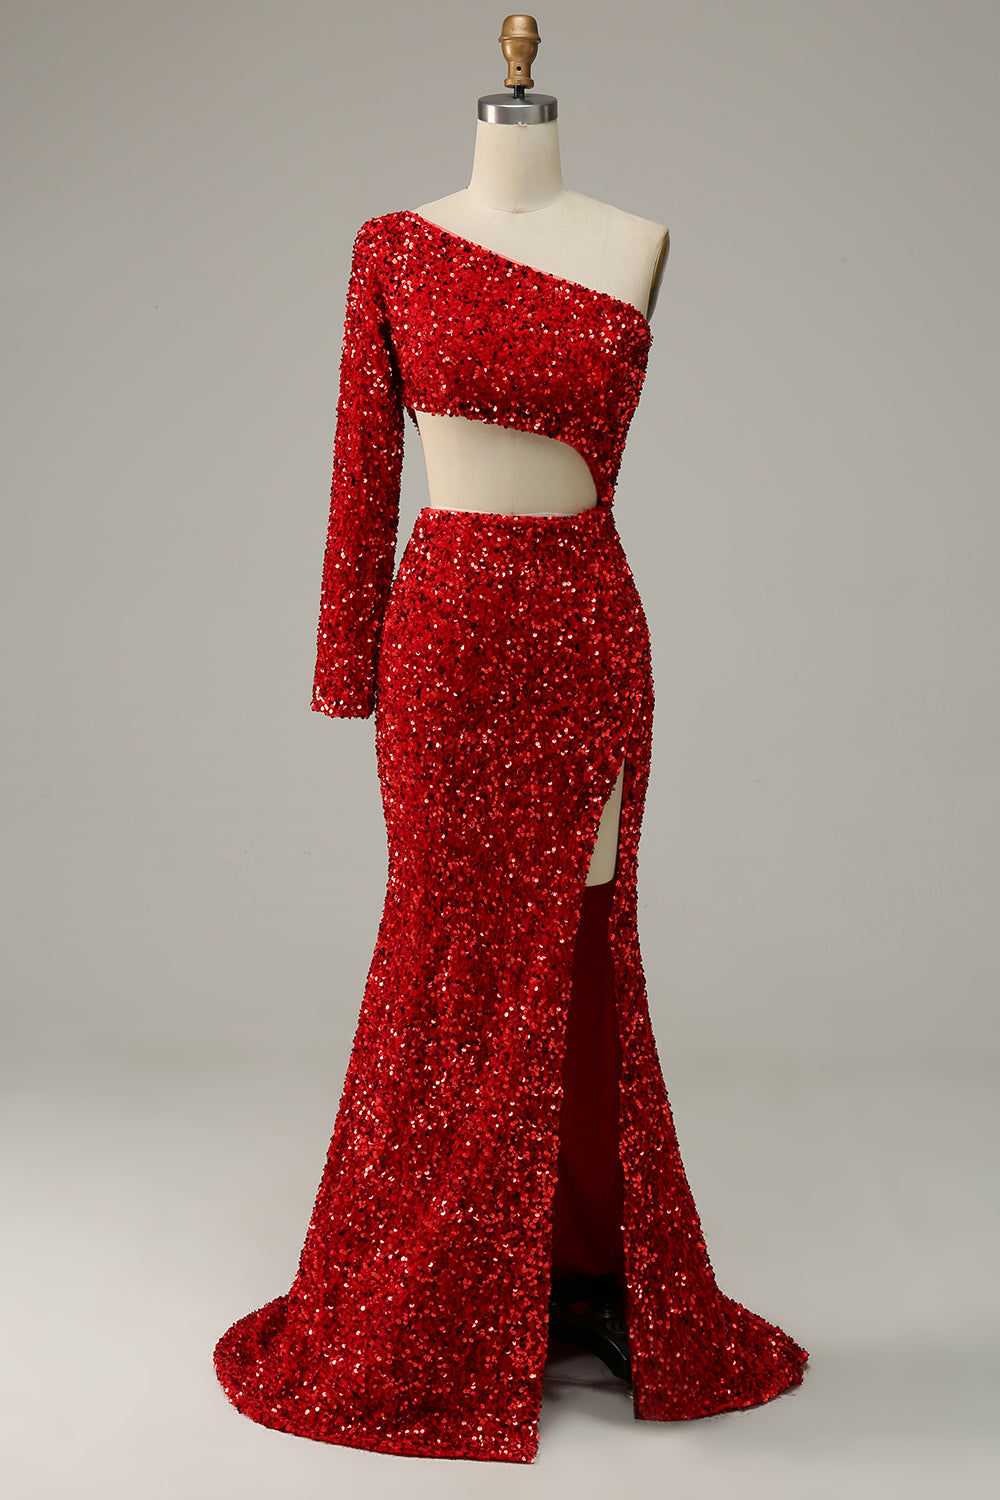 Winter Wedding, Mermaid One Shoulder Red Sequins Cut Out Prom Dress with Slit Front